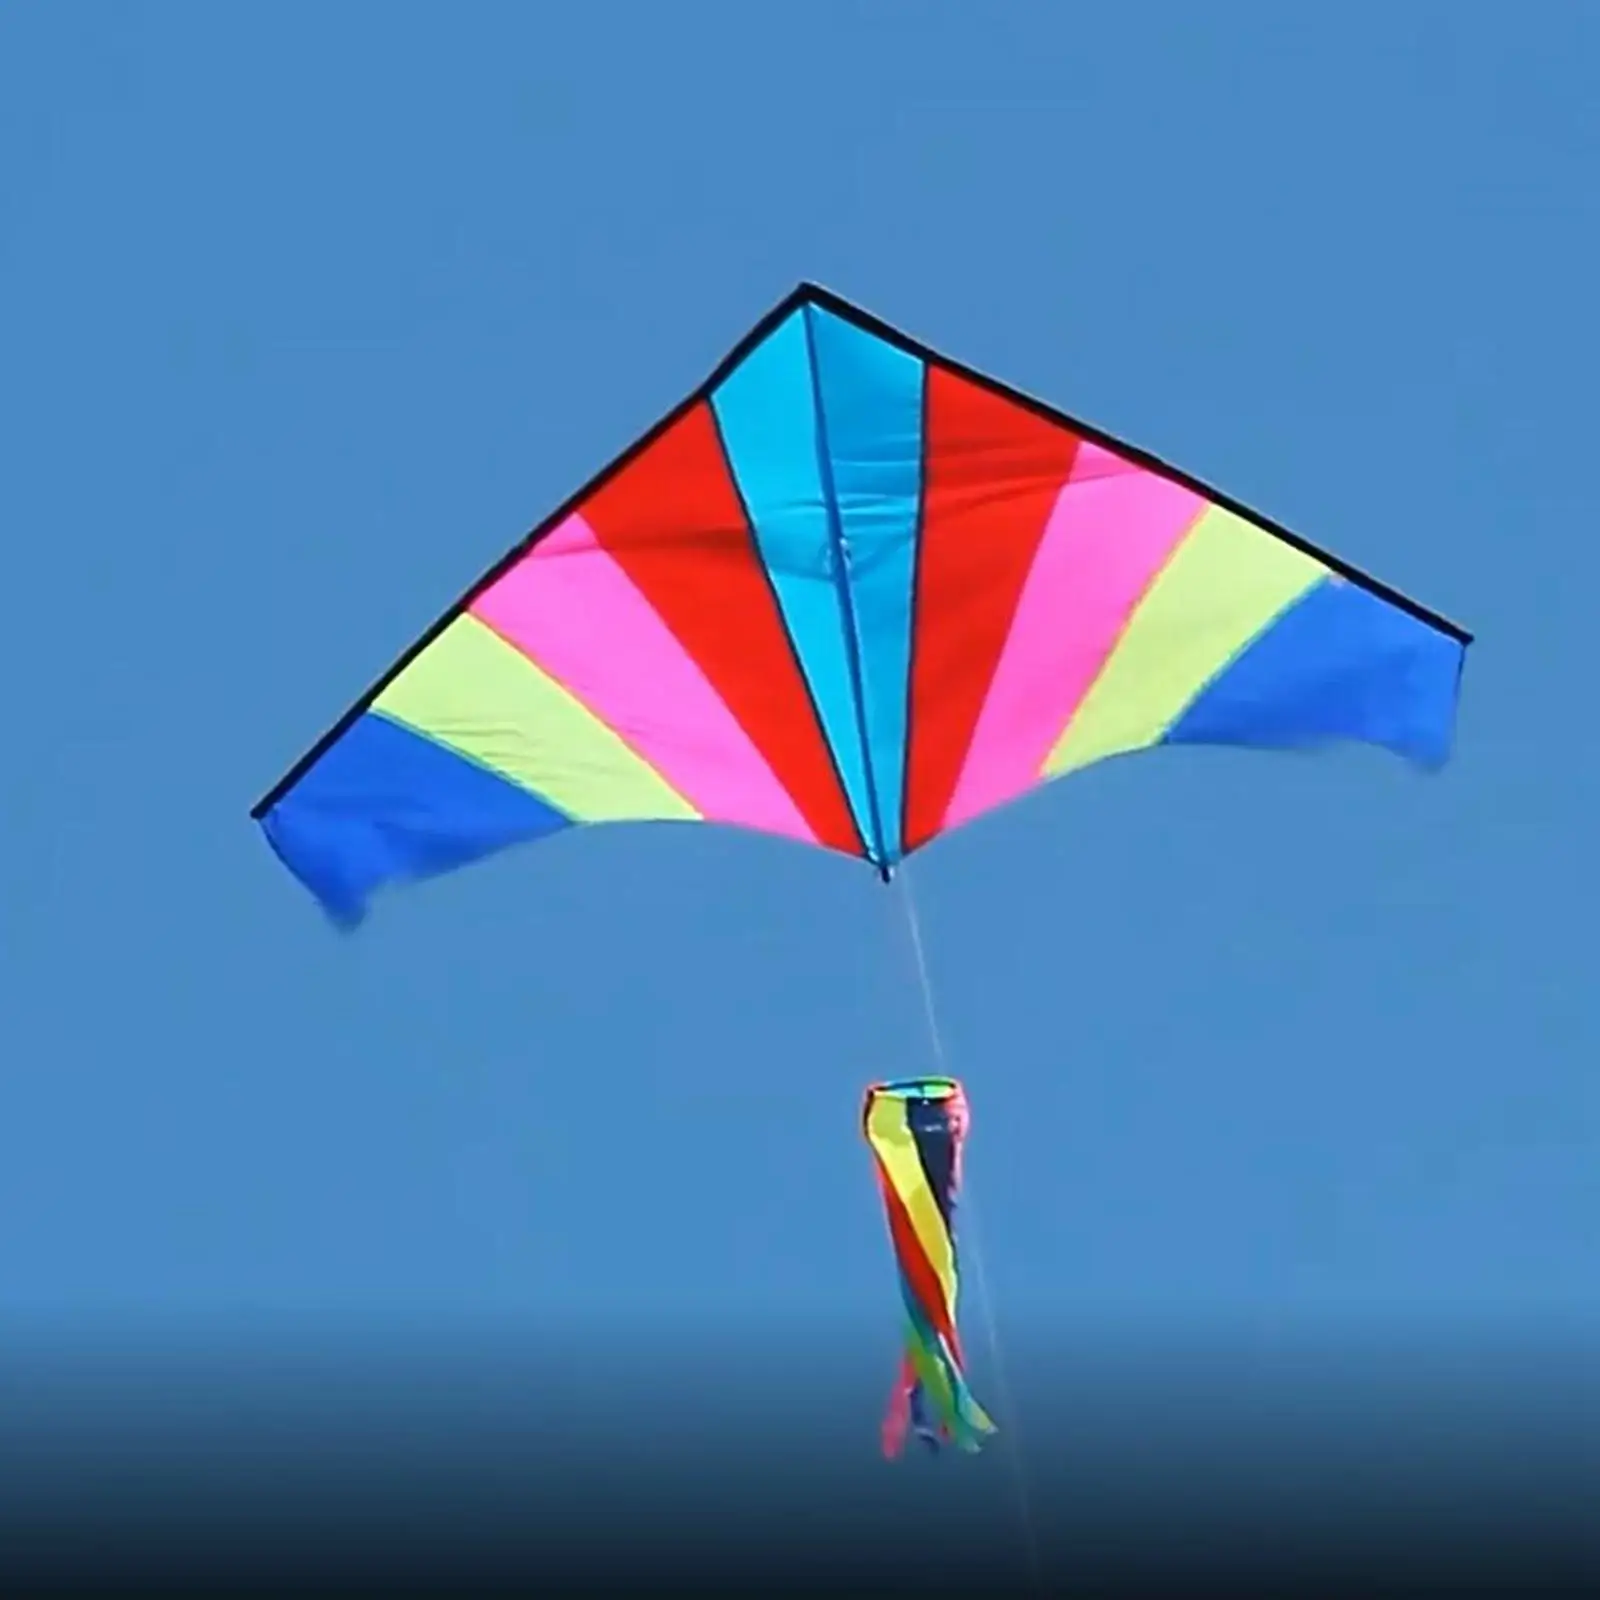 Rainbow Delta Kite Single Line Triangle Kite with Tail Huge Easy for Trips